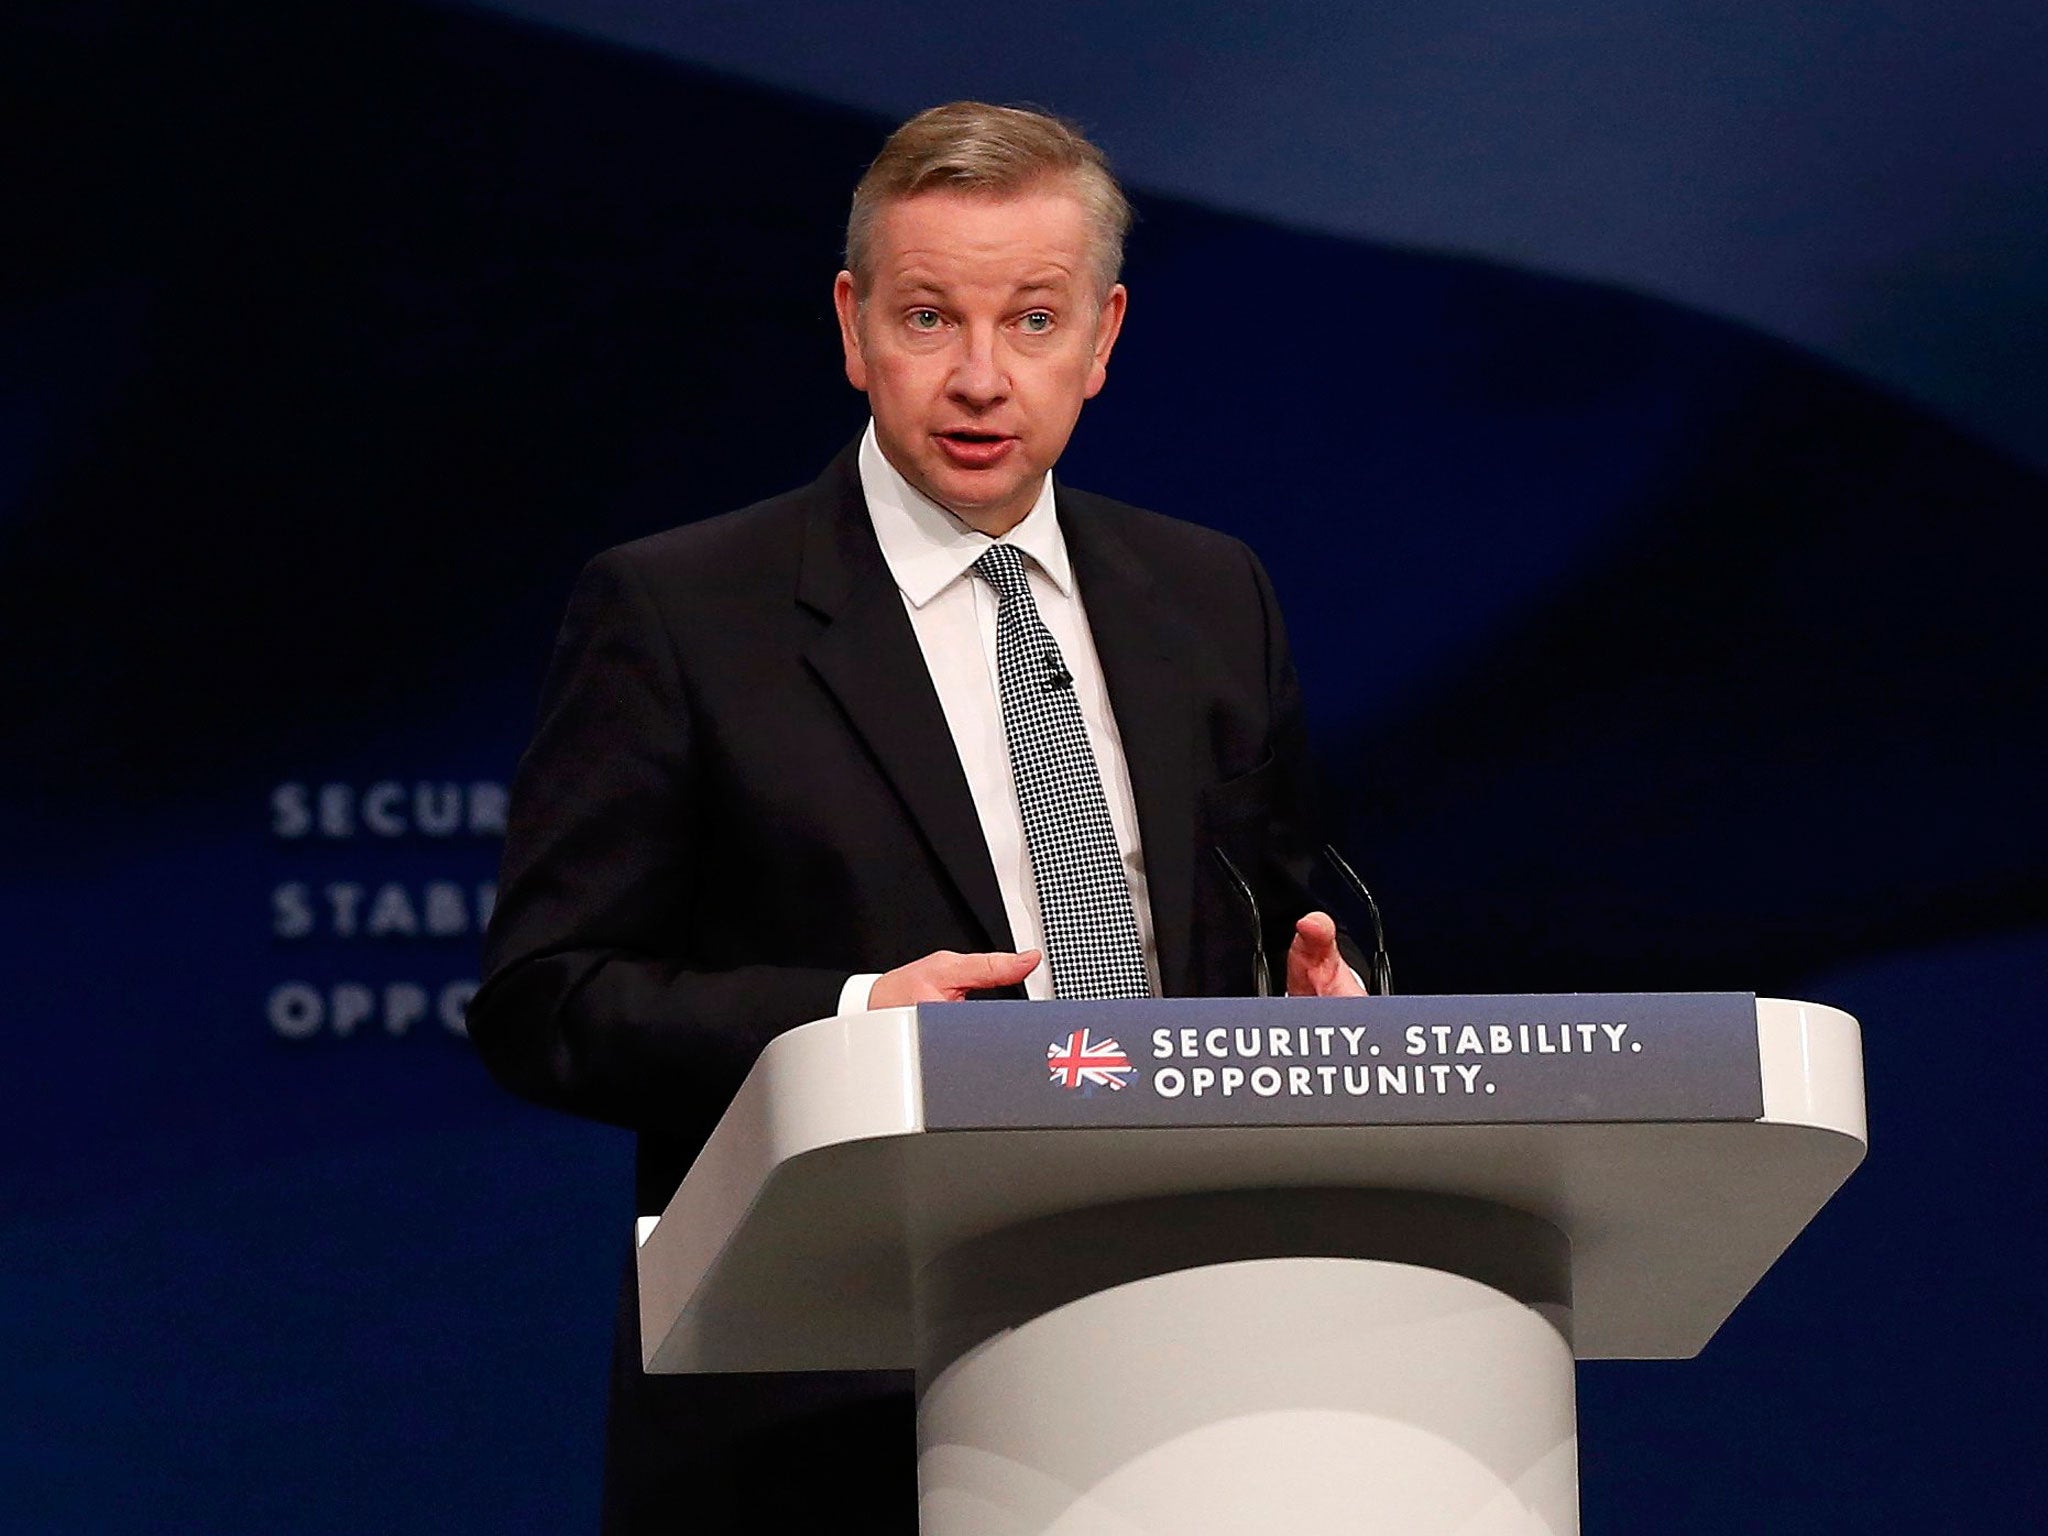 Austerity measures could put significant pressures on Mr Gove’s reform programme